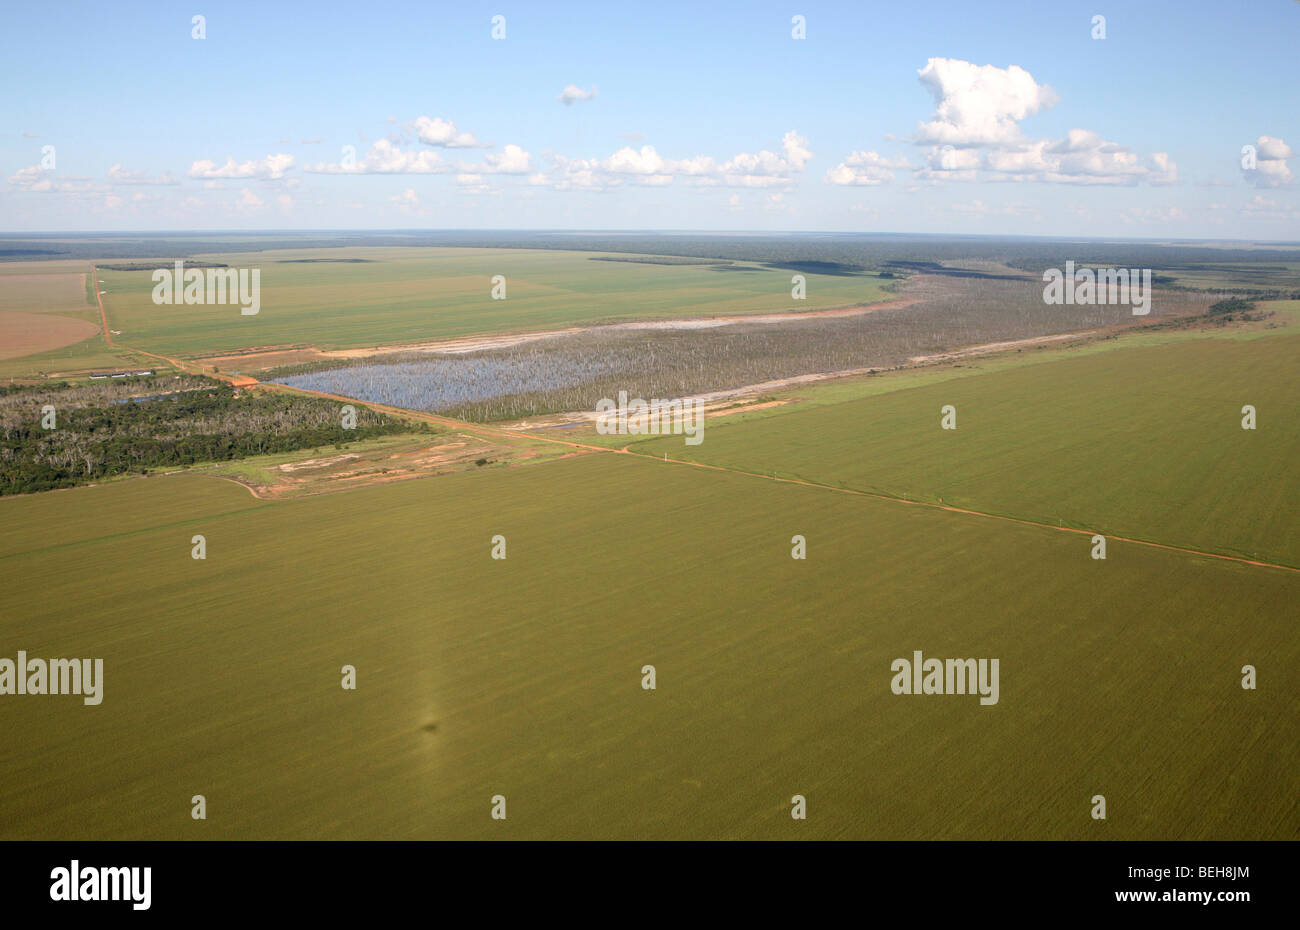 A lrage part of the Amazone has been destroyed and transferred into farmland. The main crops being cultivated are soya, grass fo Stock Photo